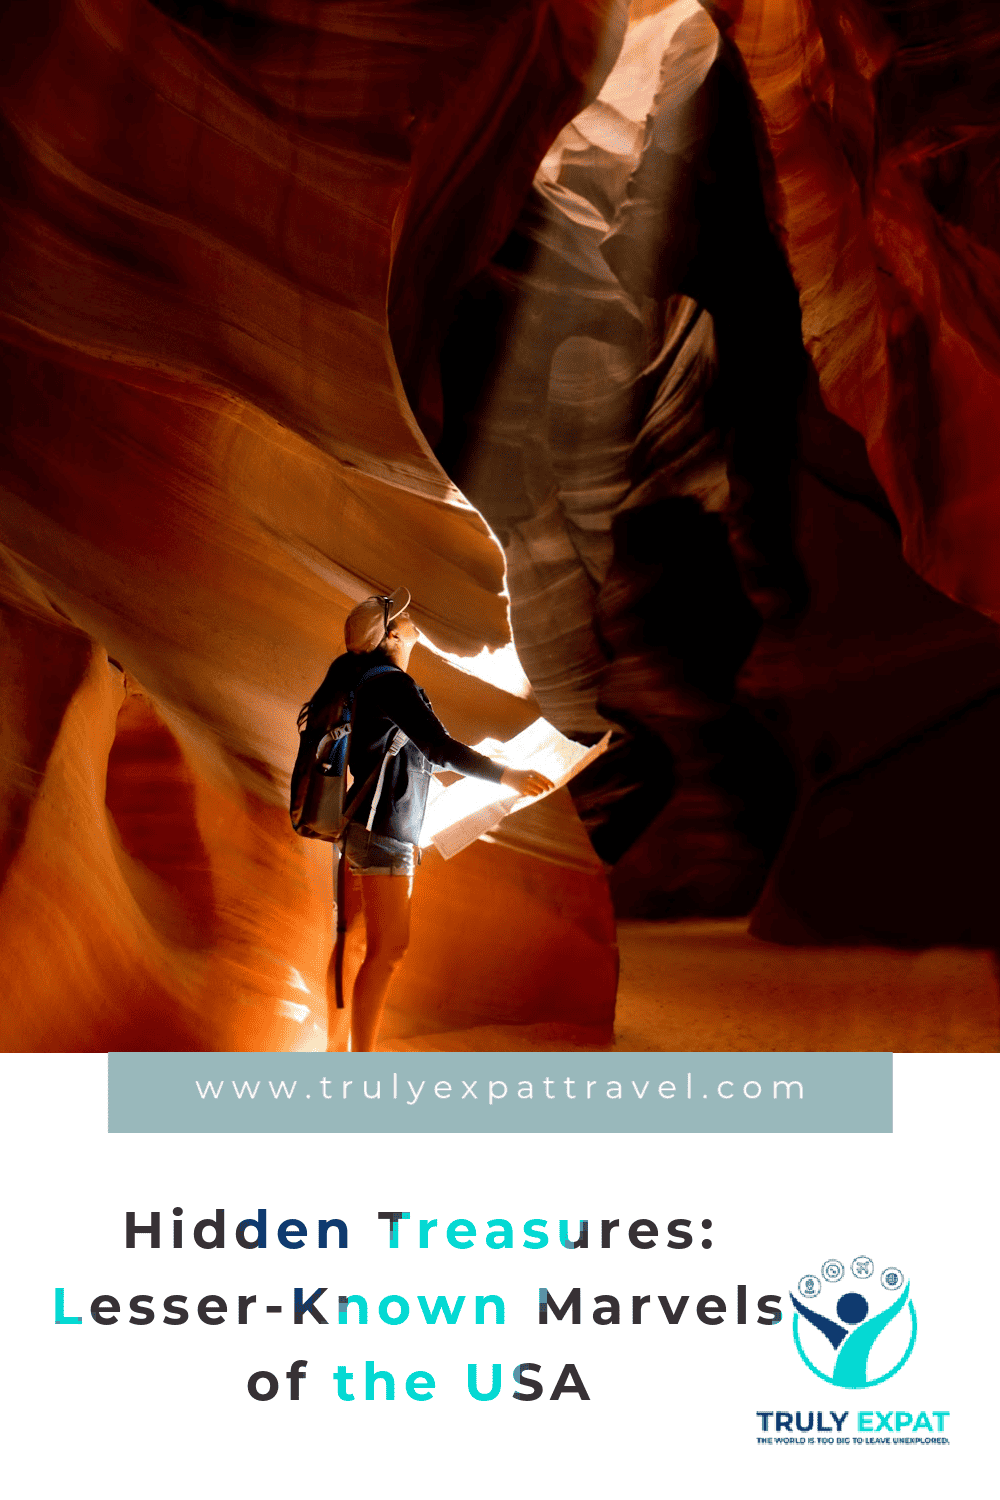 Hidden Treasures: Lesser-Known Marvels of the USA